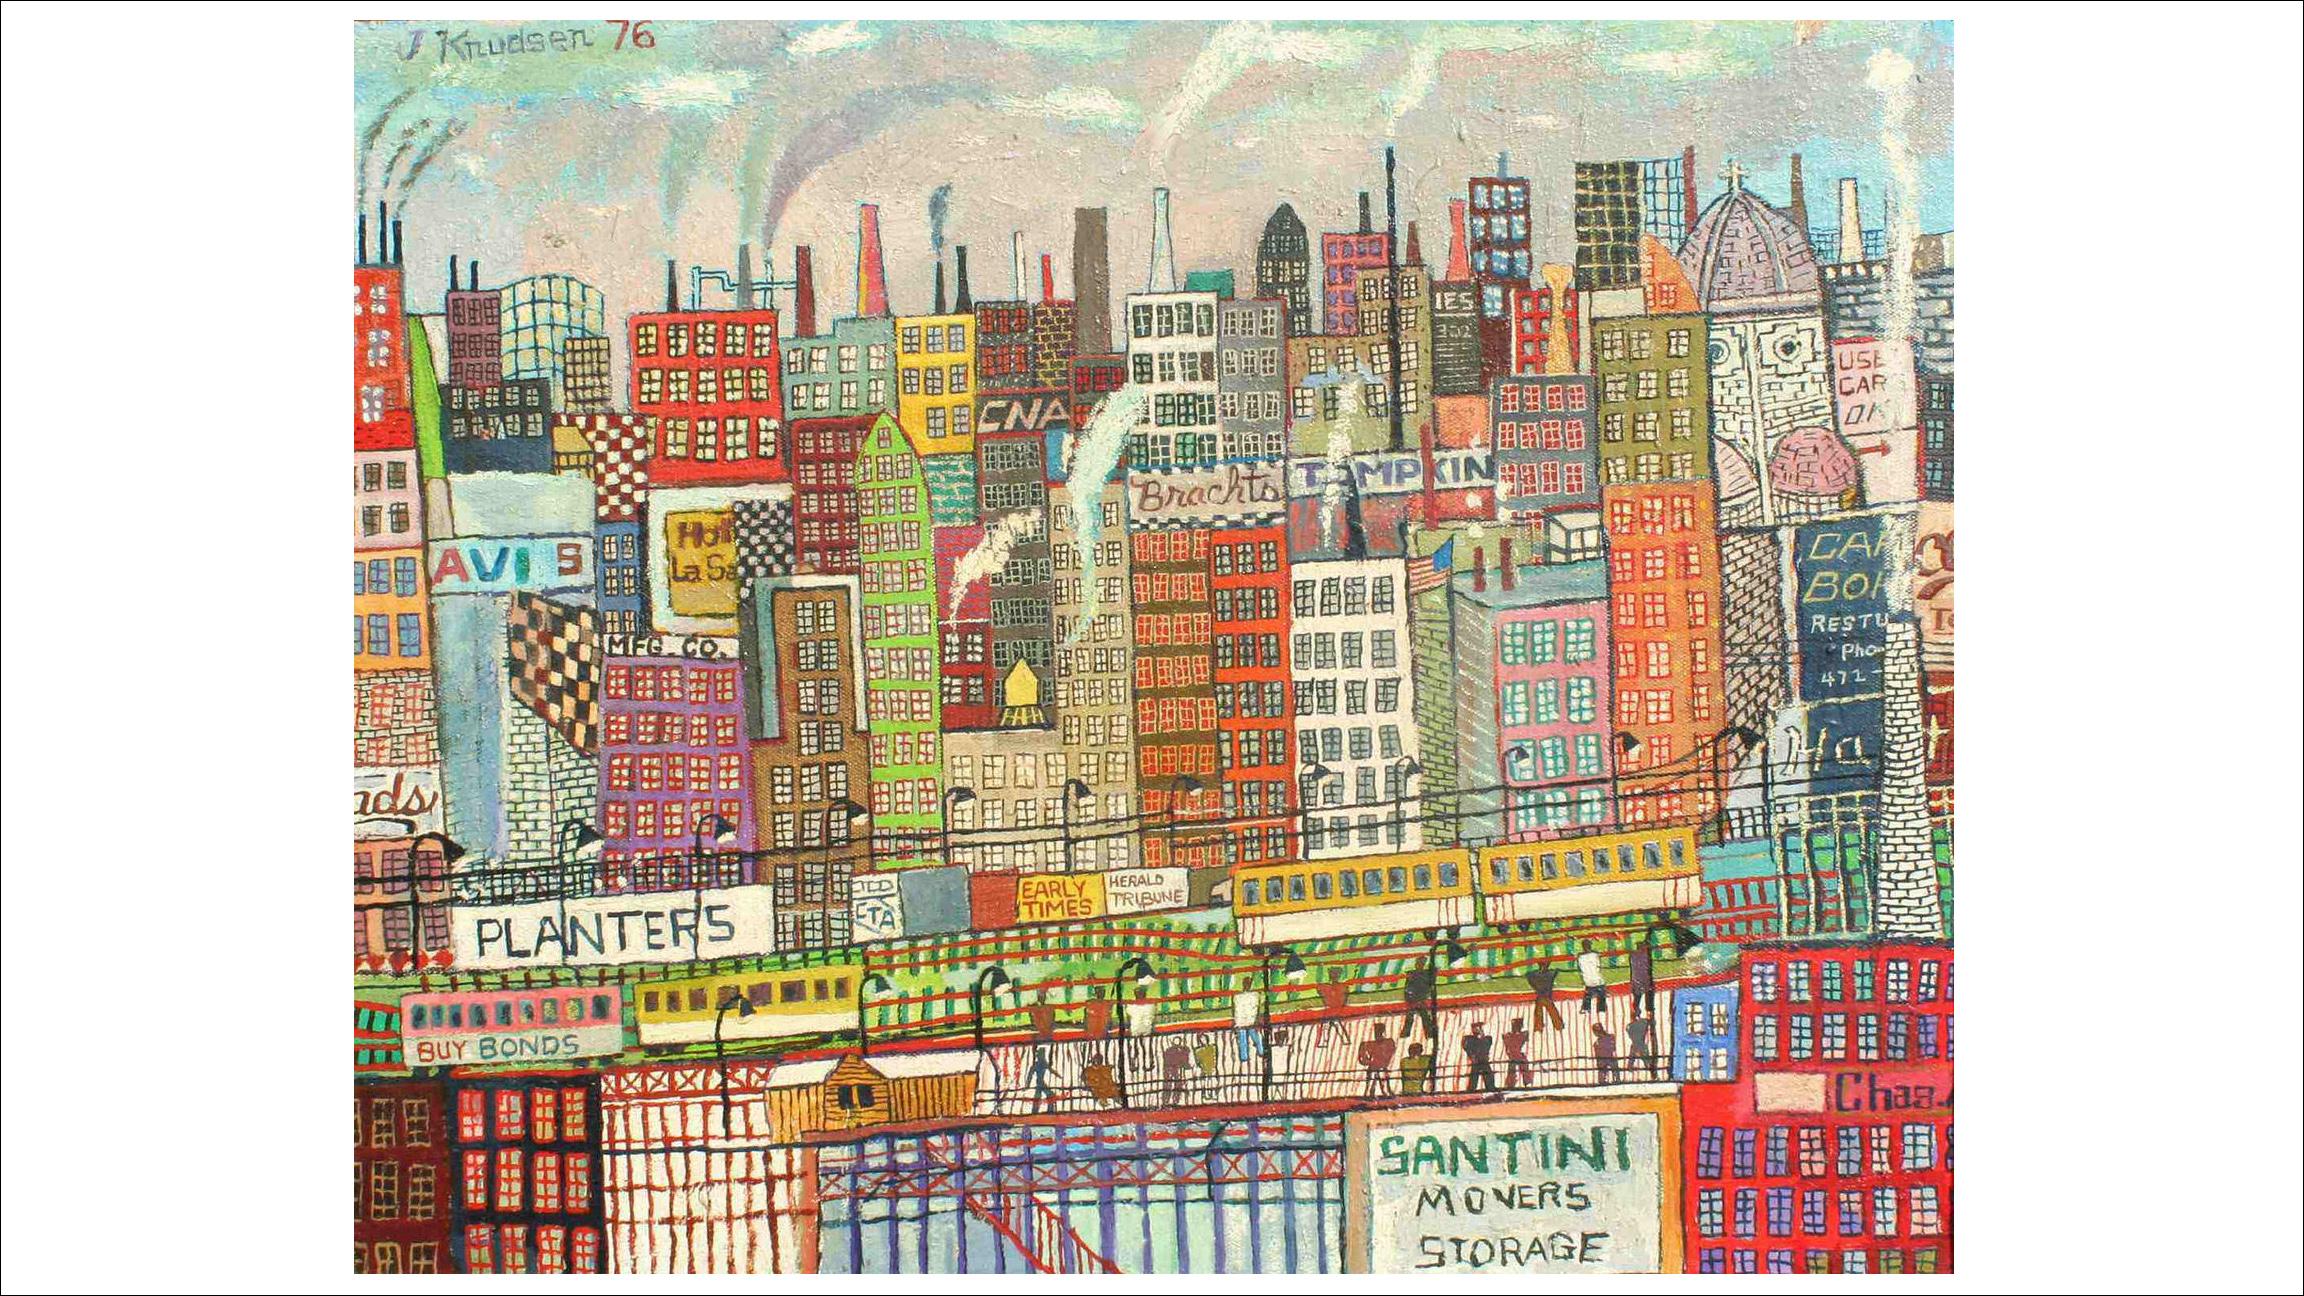 John Knudsen, “Untitled (Cityscape)” 1976. Chicago’s Richard Norton Gallery returns to SOFA Chicago with works by the late John Knudsen and Harold Haydon, among others. (Courtesy of SOFA Chicago)